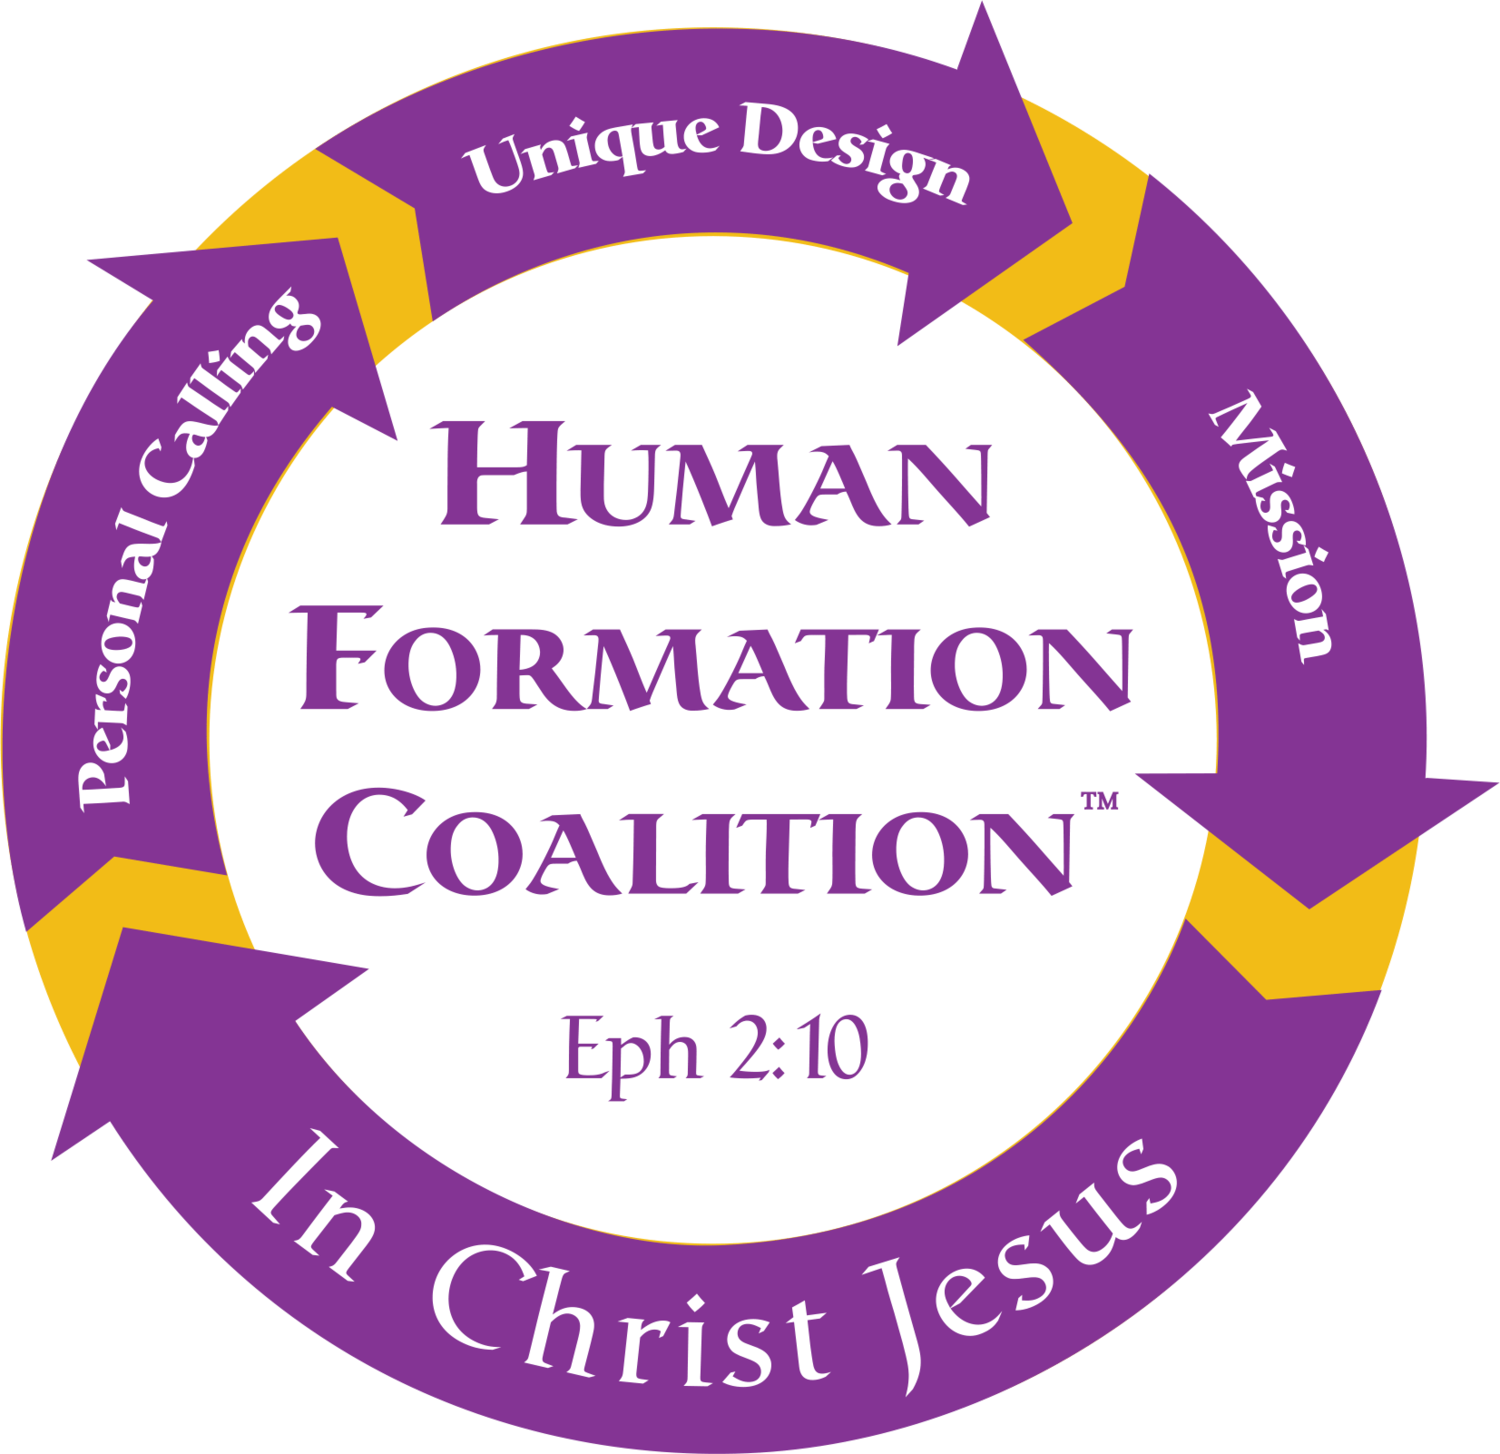 The Human Formation Coalition™